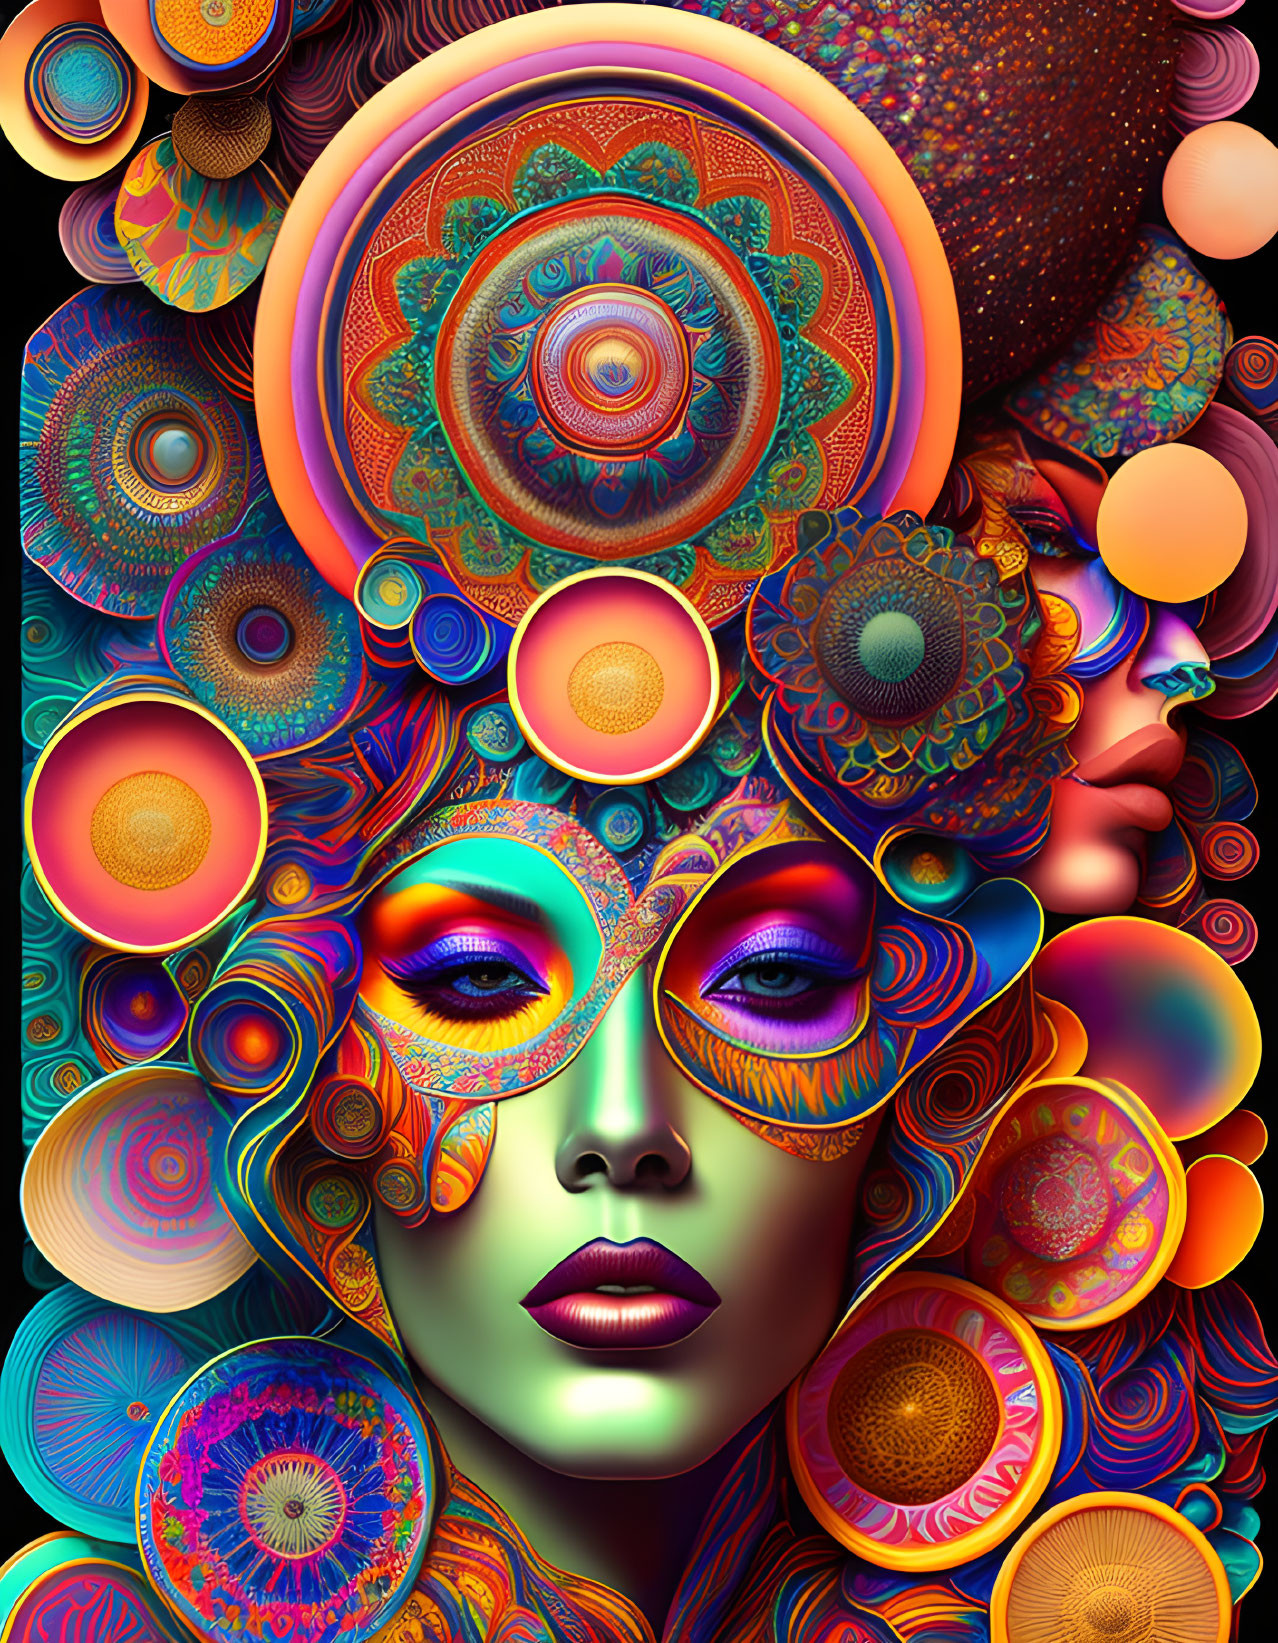 Colorful digital artwork of woman with psychedelic patterns & shapes.